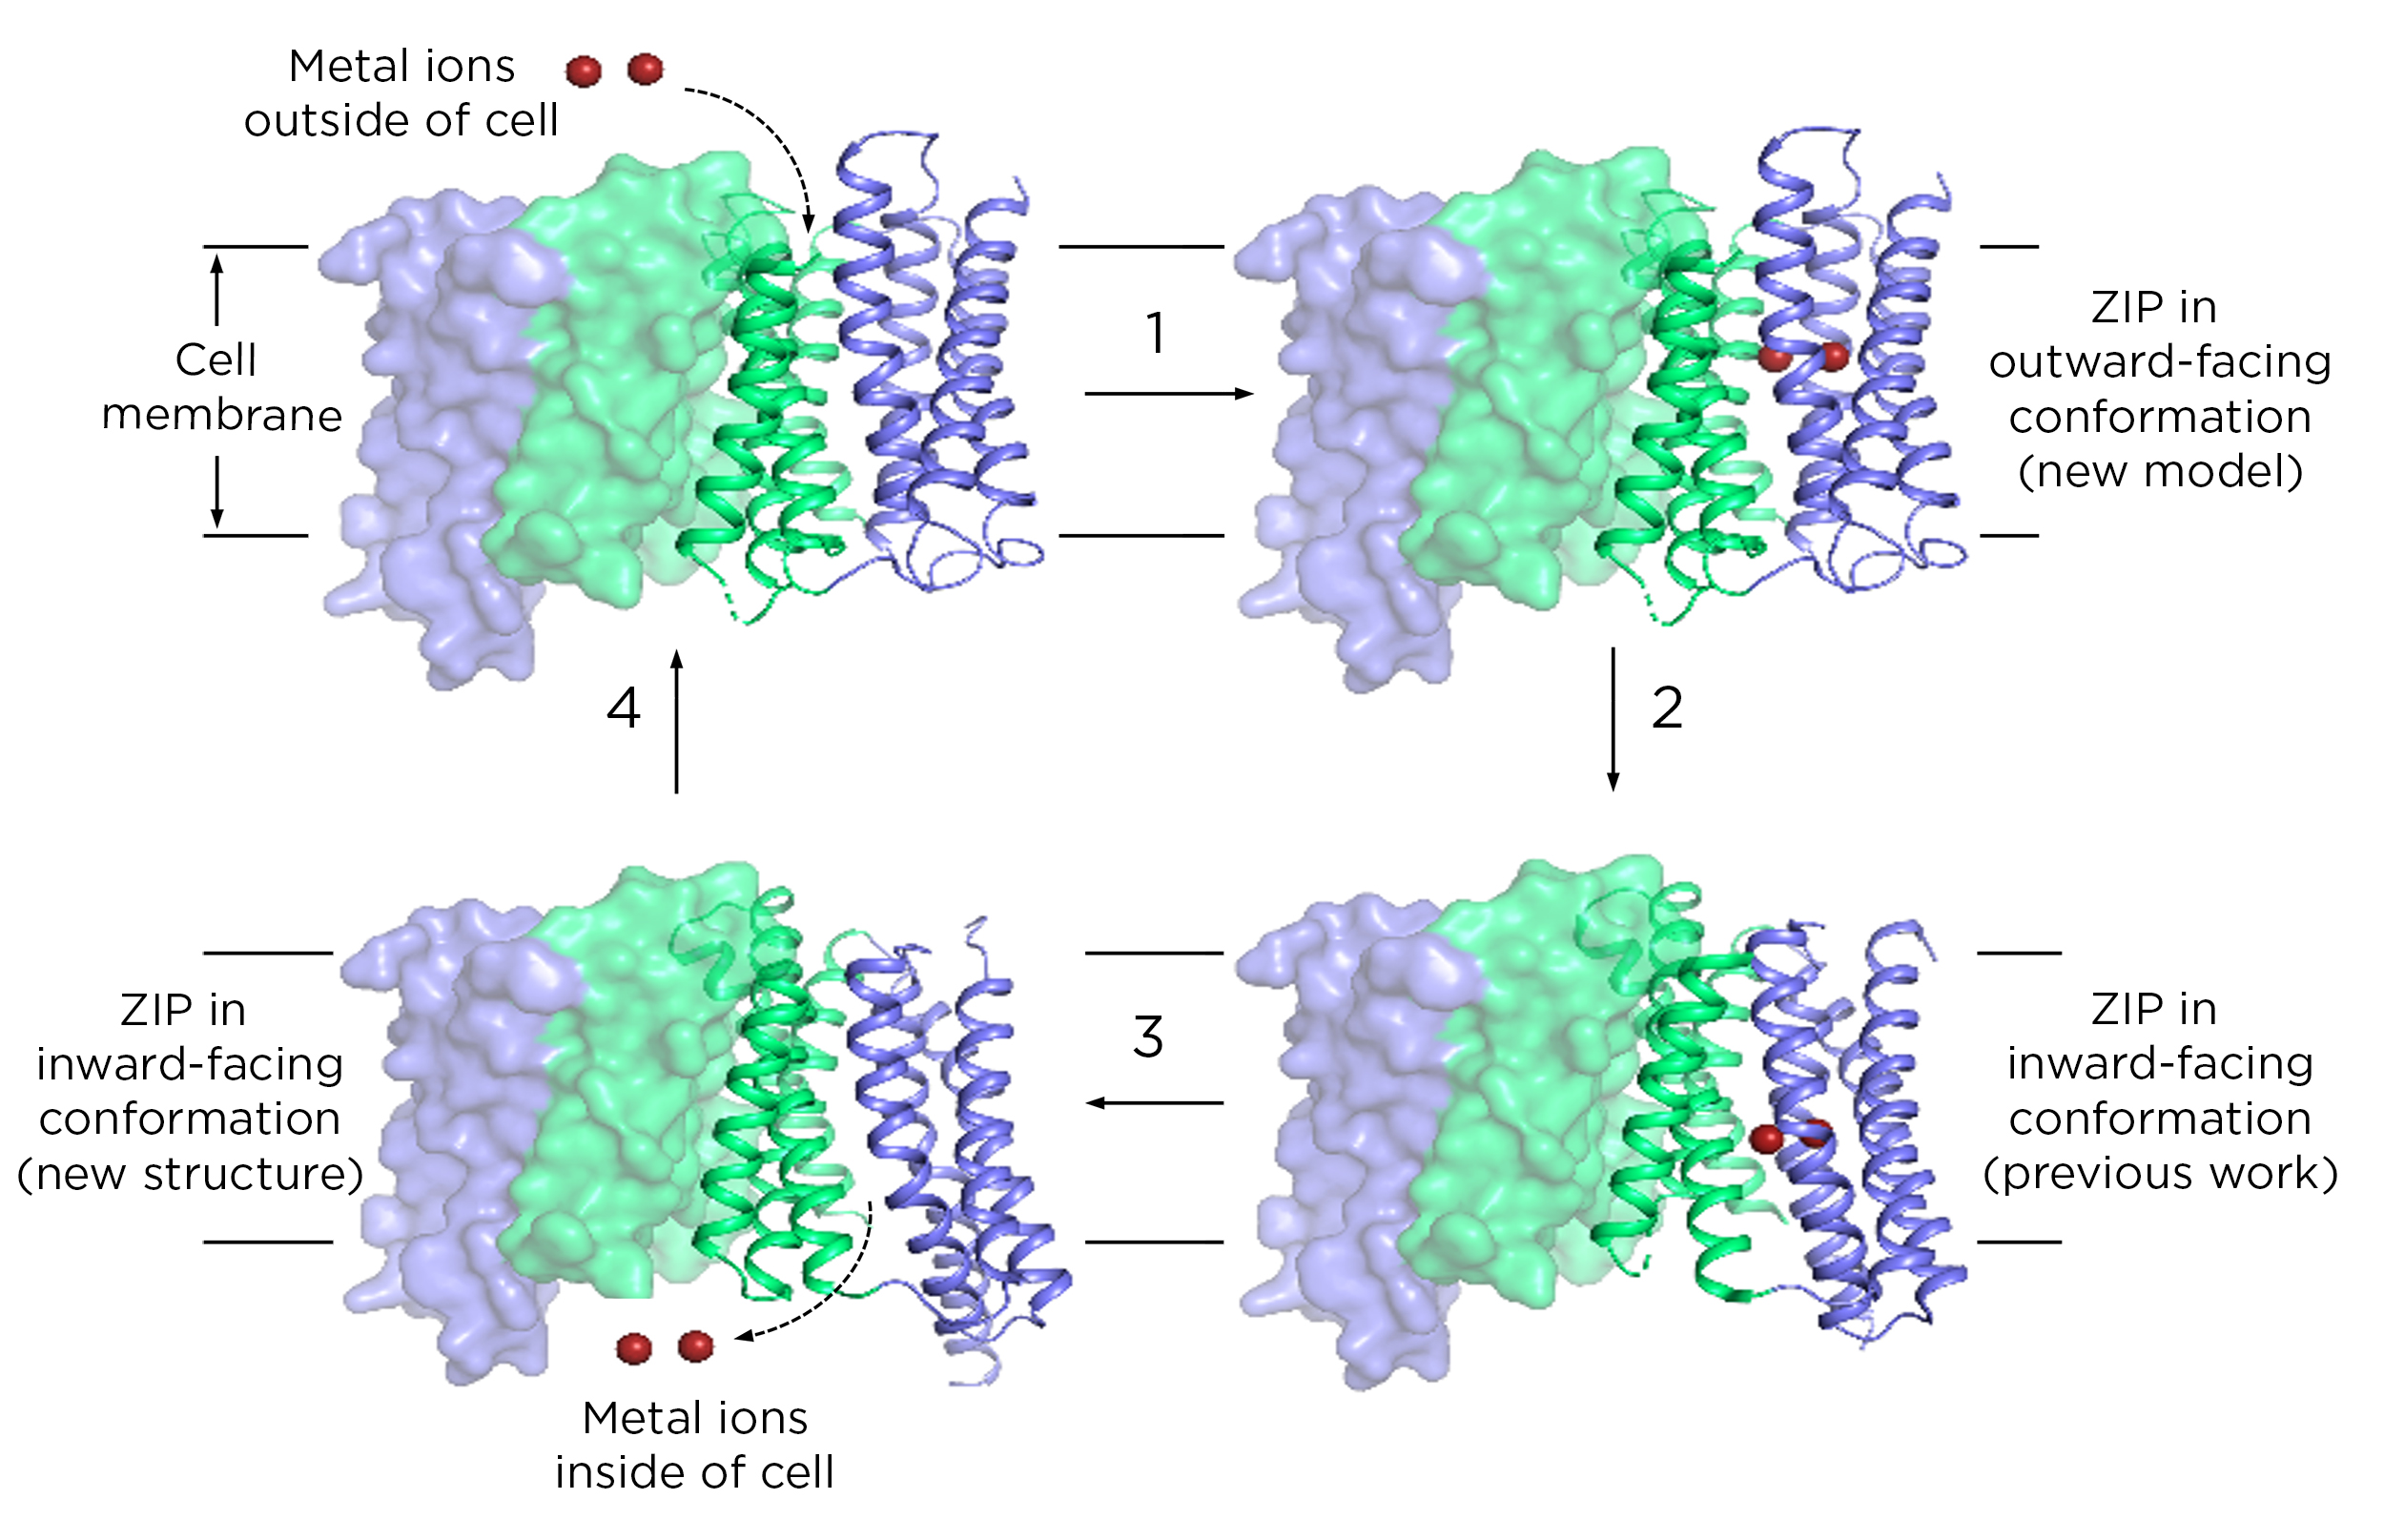 A four-paneled schematic shows how a ZIP protein moves metals from outside a cell into its interior through a cell membrane. In the first panel, two red metal ions begin their journey outside the cell. In the next panel, the metals bind inside ZIP protein, a green and light purple structure that spans the cell membrane. The metals bind inside protein, which is oriented in what’s called its outward conformation (meaning it’s open to the outside). Next, the metals shift downward, still inside the protein, as the ZIP adjusts to its inward conformation (meaning it is now open to the cell’s interior). In the final panel, the metals are released from the protein and into the cell, after which the protein switches back to the original status for a new cycle of transport.